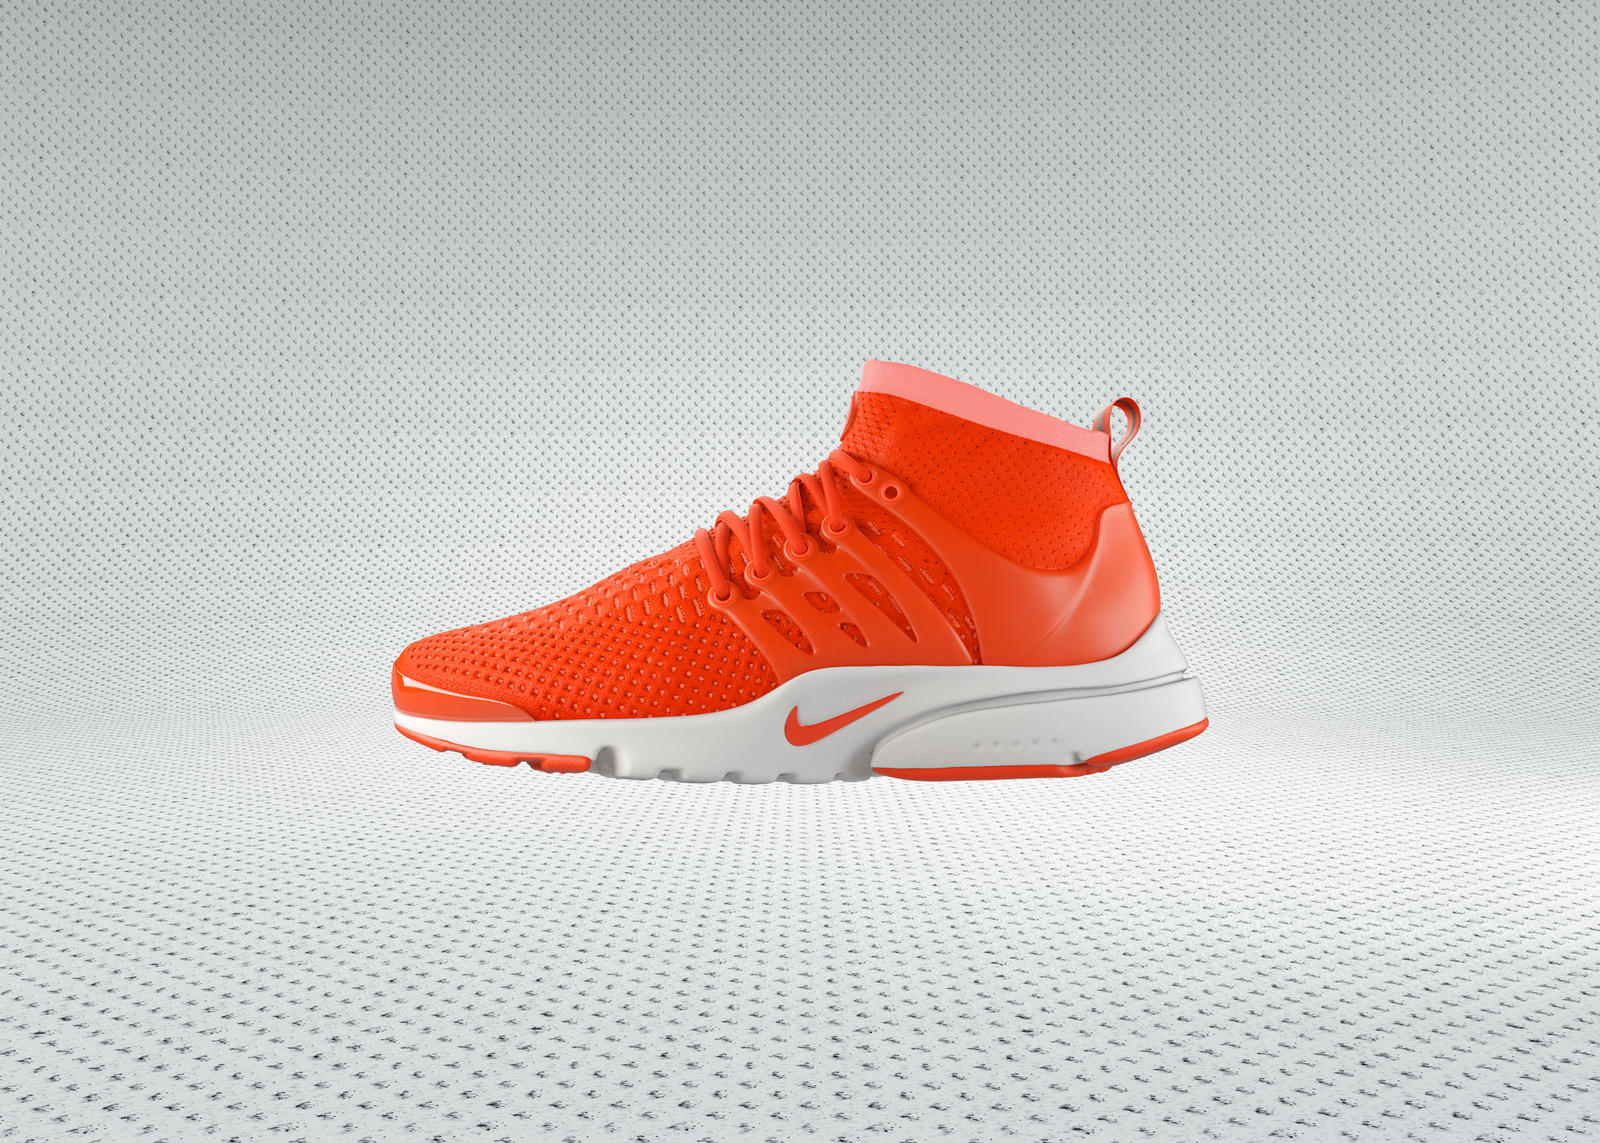 The Nike Air Presto Gets Updated with 